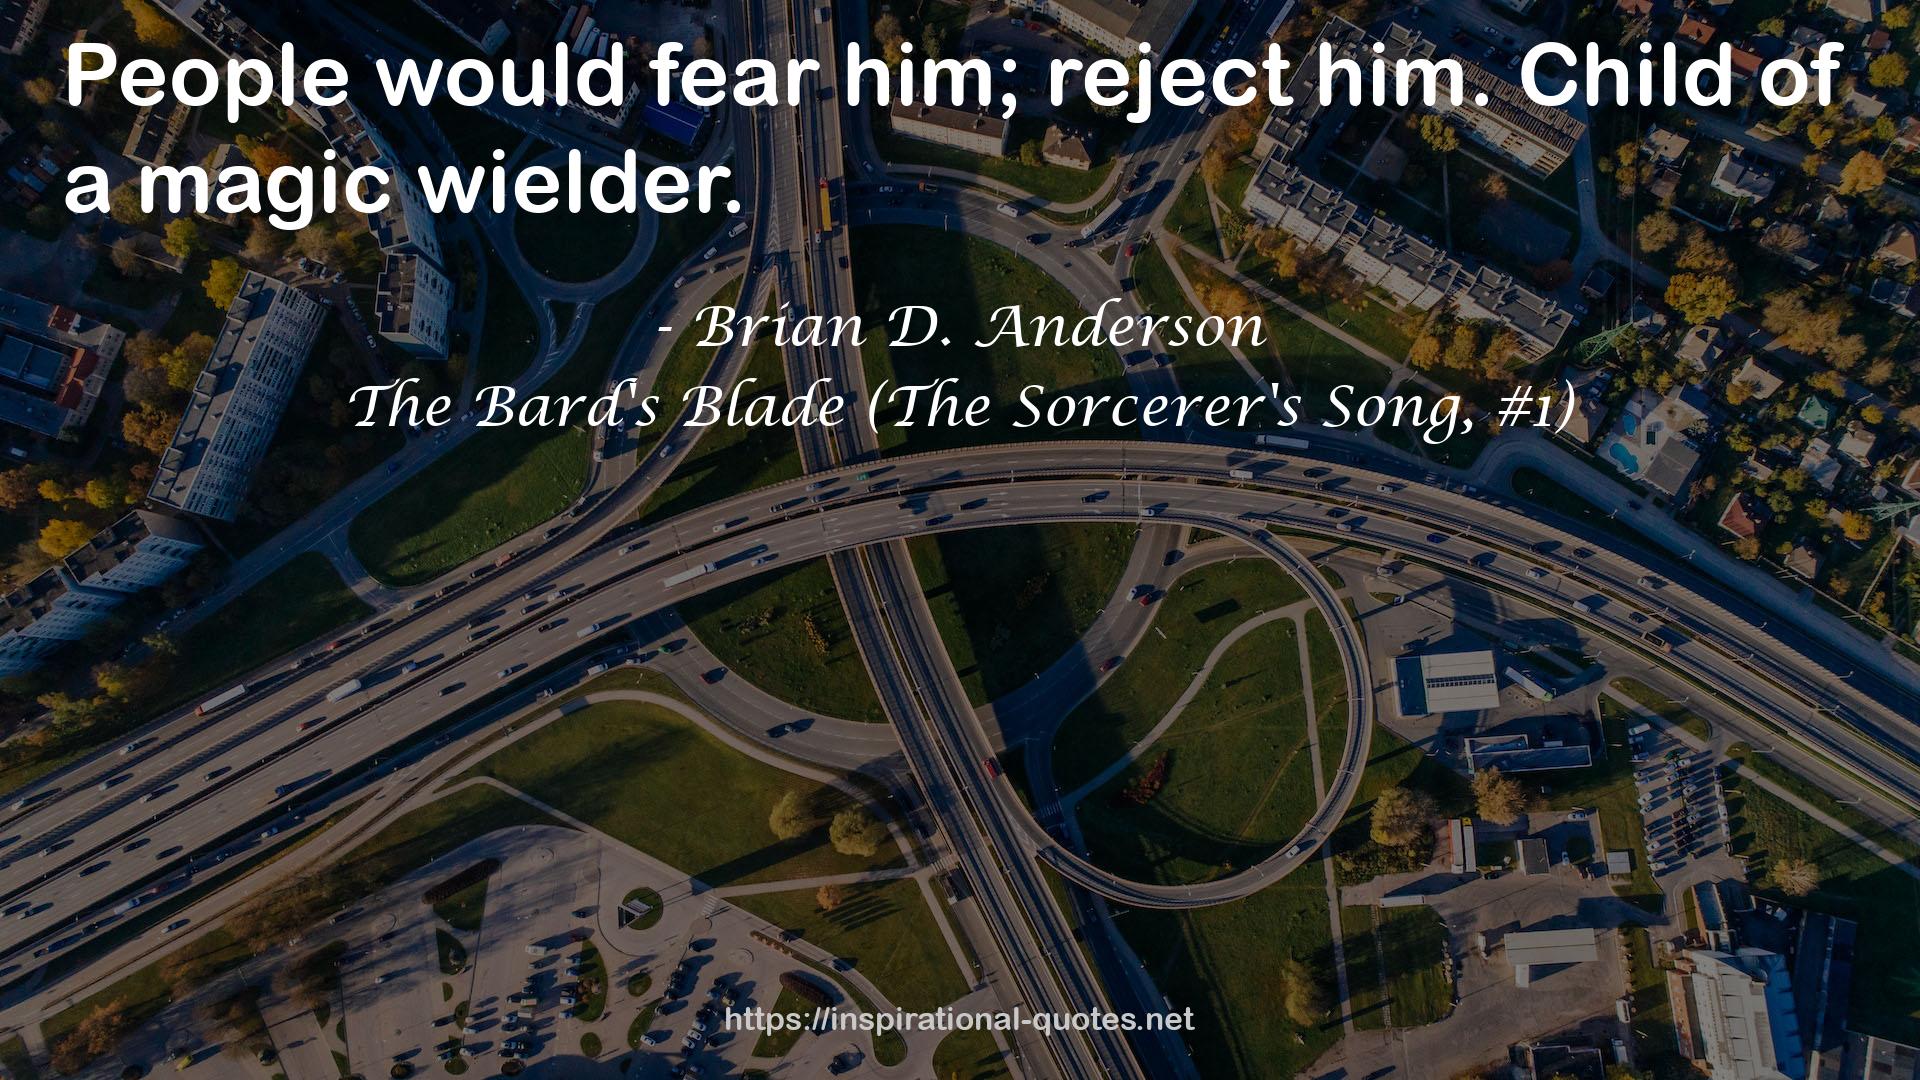 The Bard's Blade (The Sorcerer's Song, #1) QUOTES